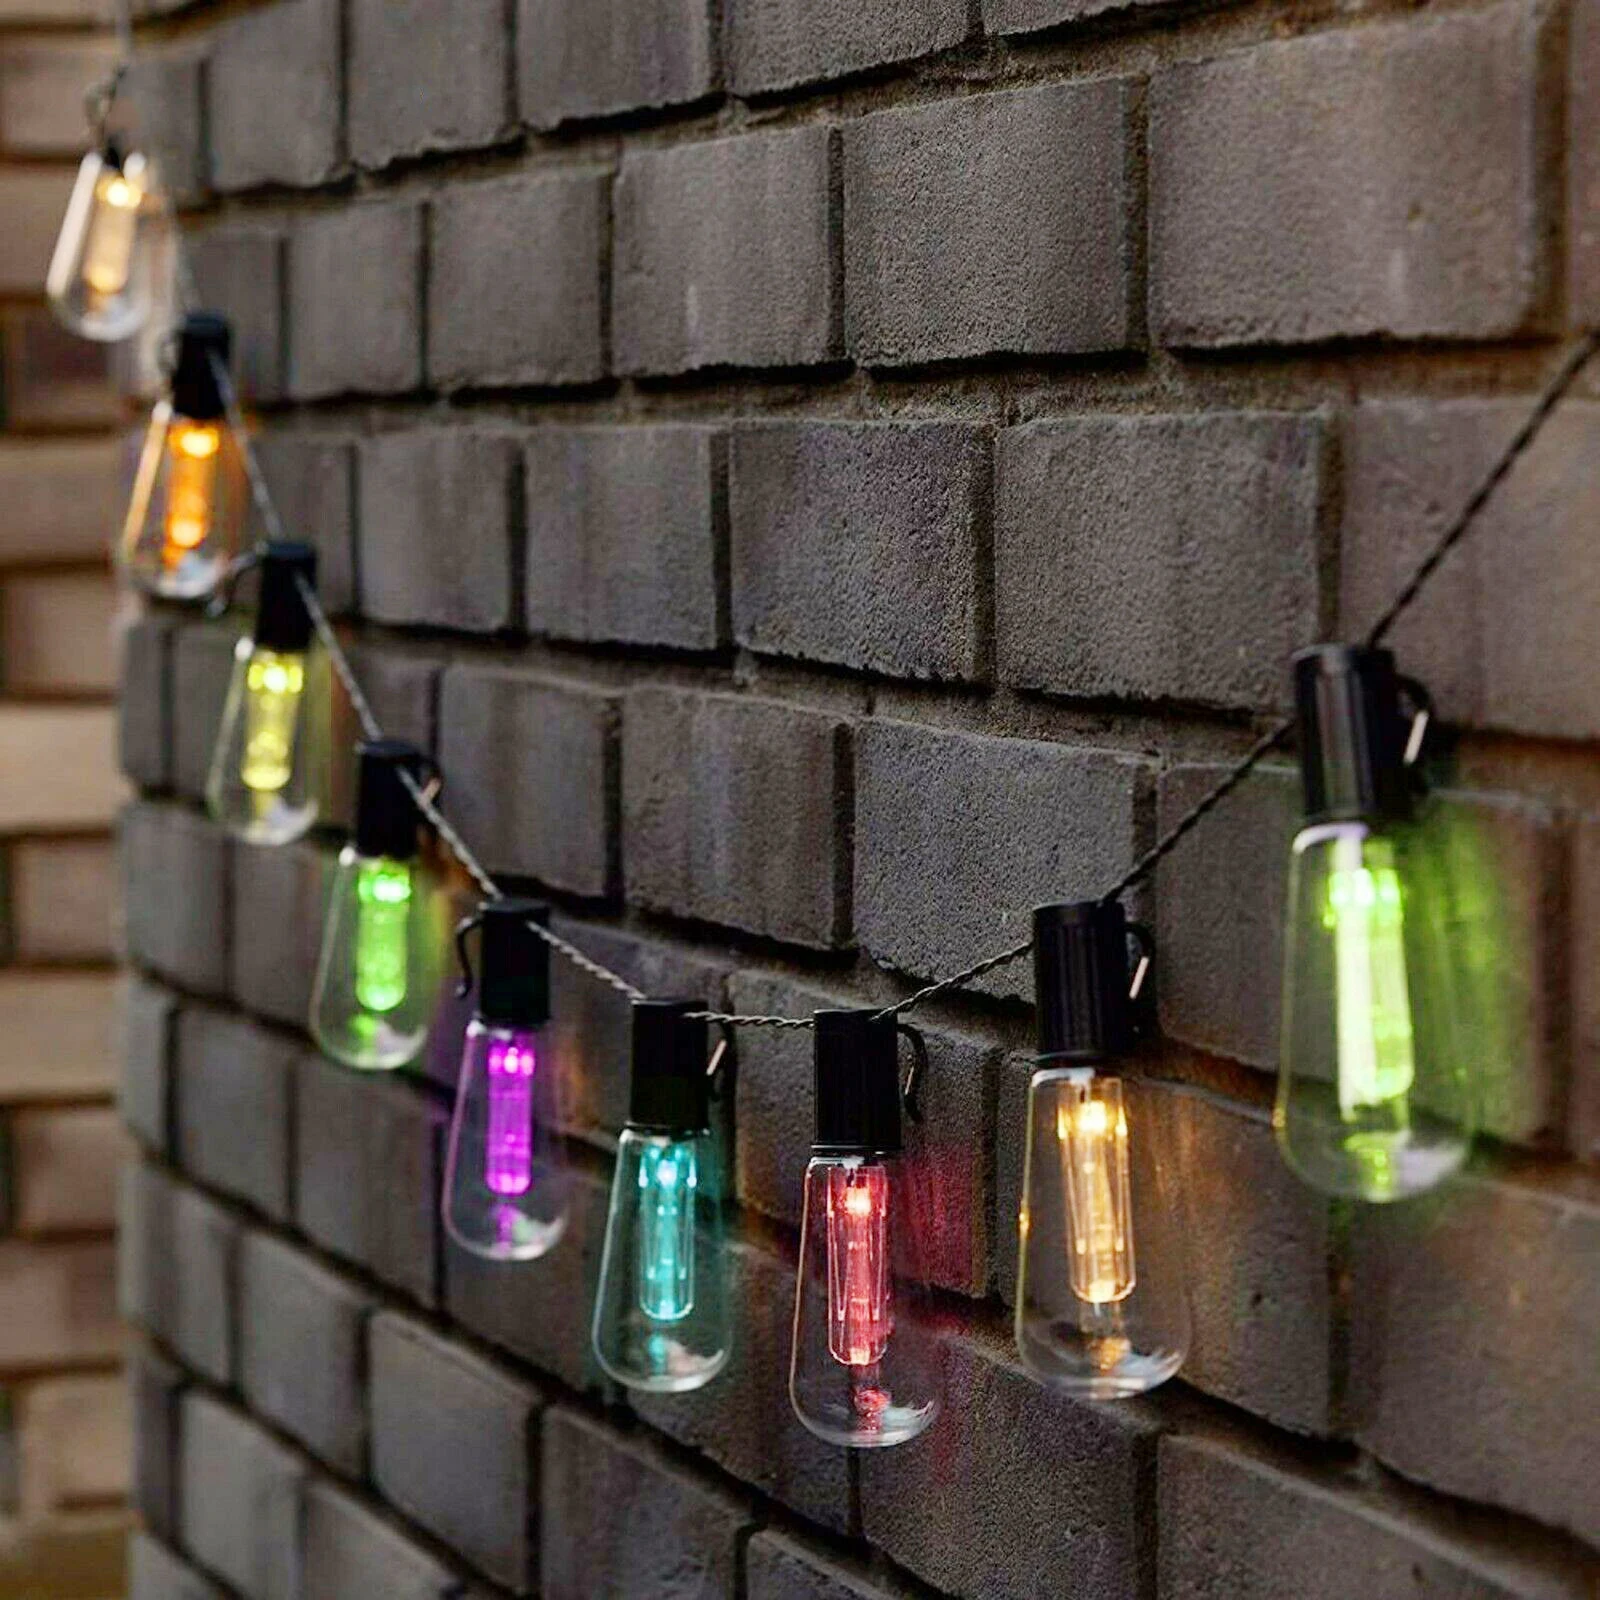 LED String Lights Outdoor Decoration Fairy Light Bulb Patio Lamp Garland For Party Wedding Garden Home Christmas